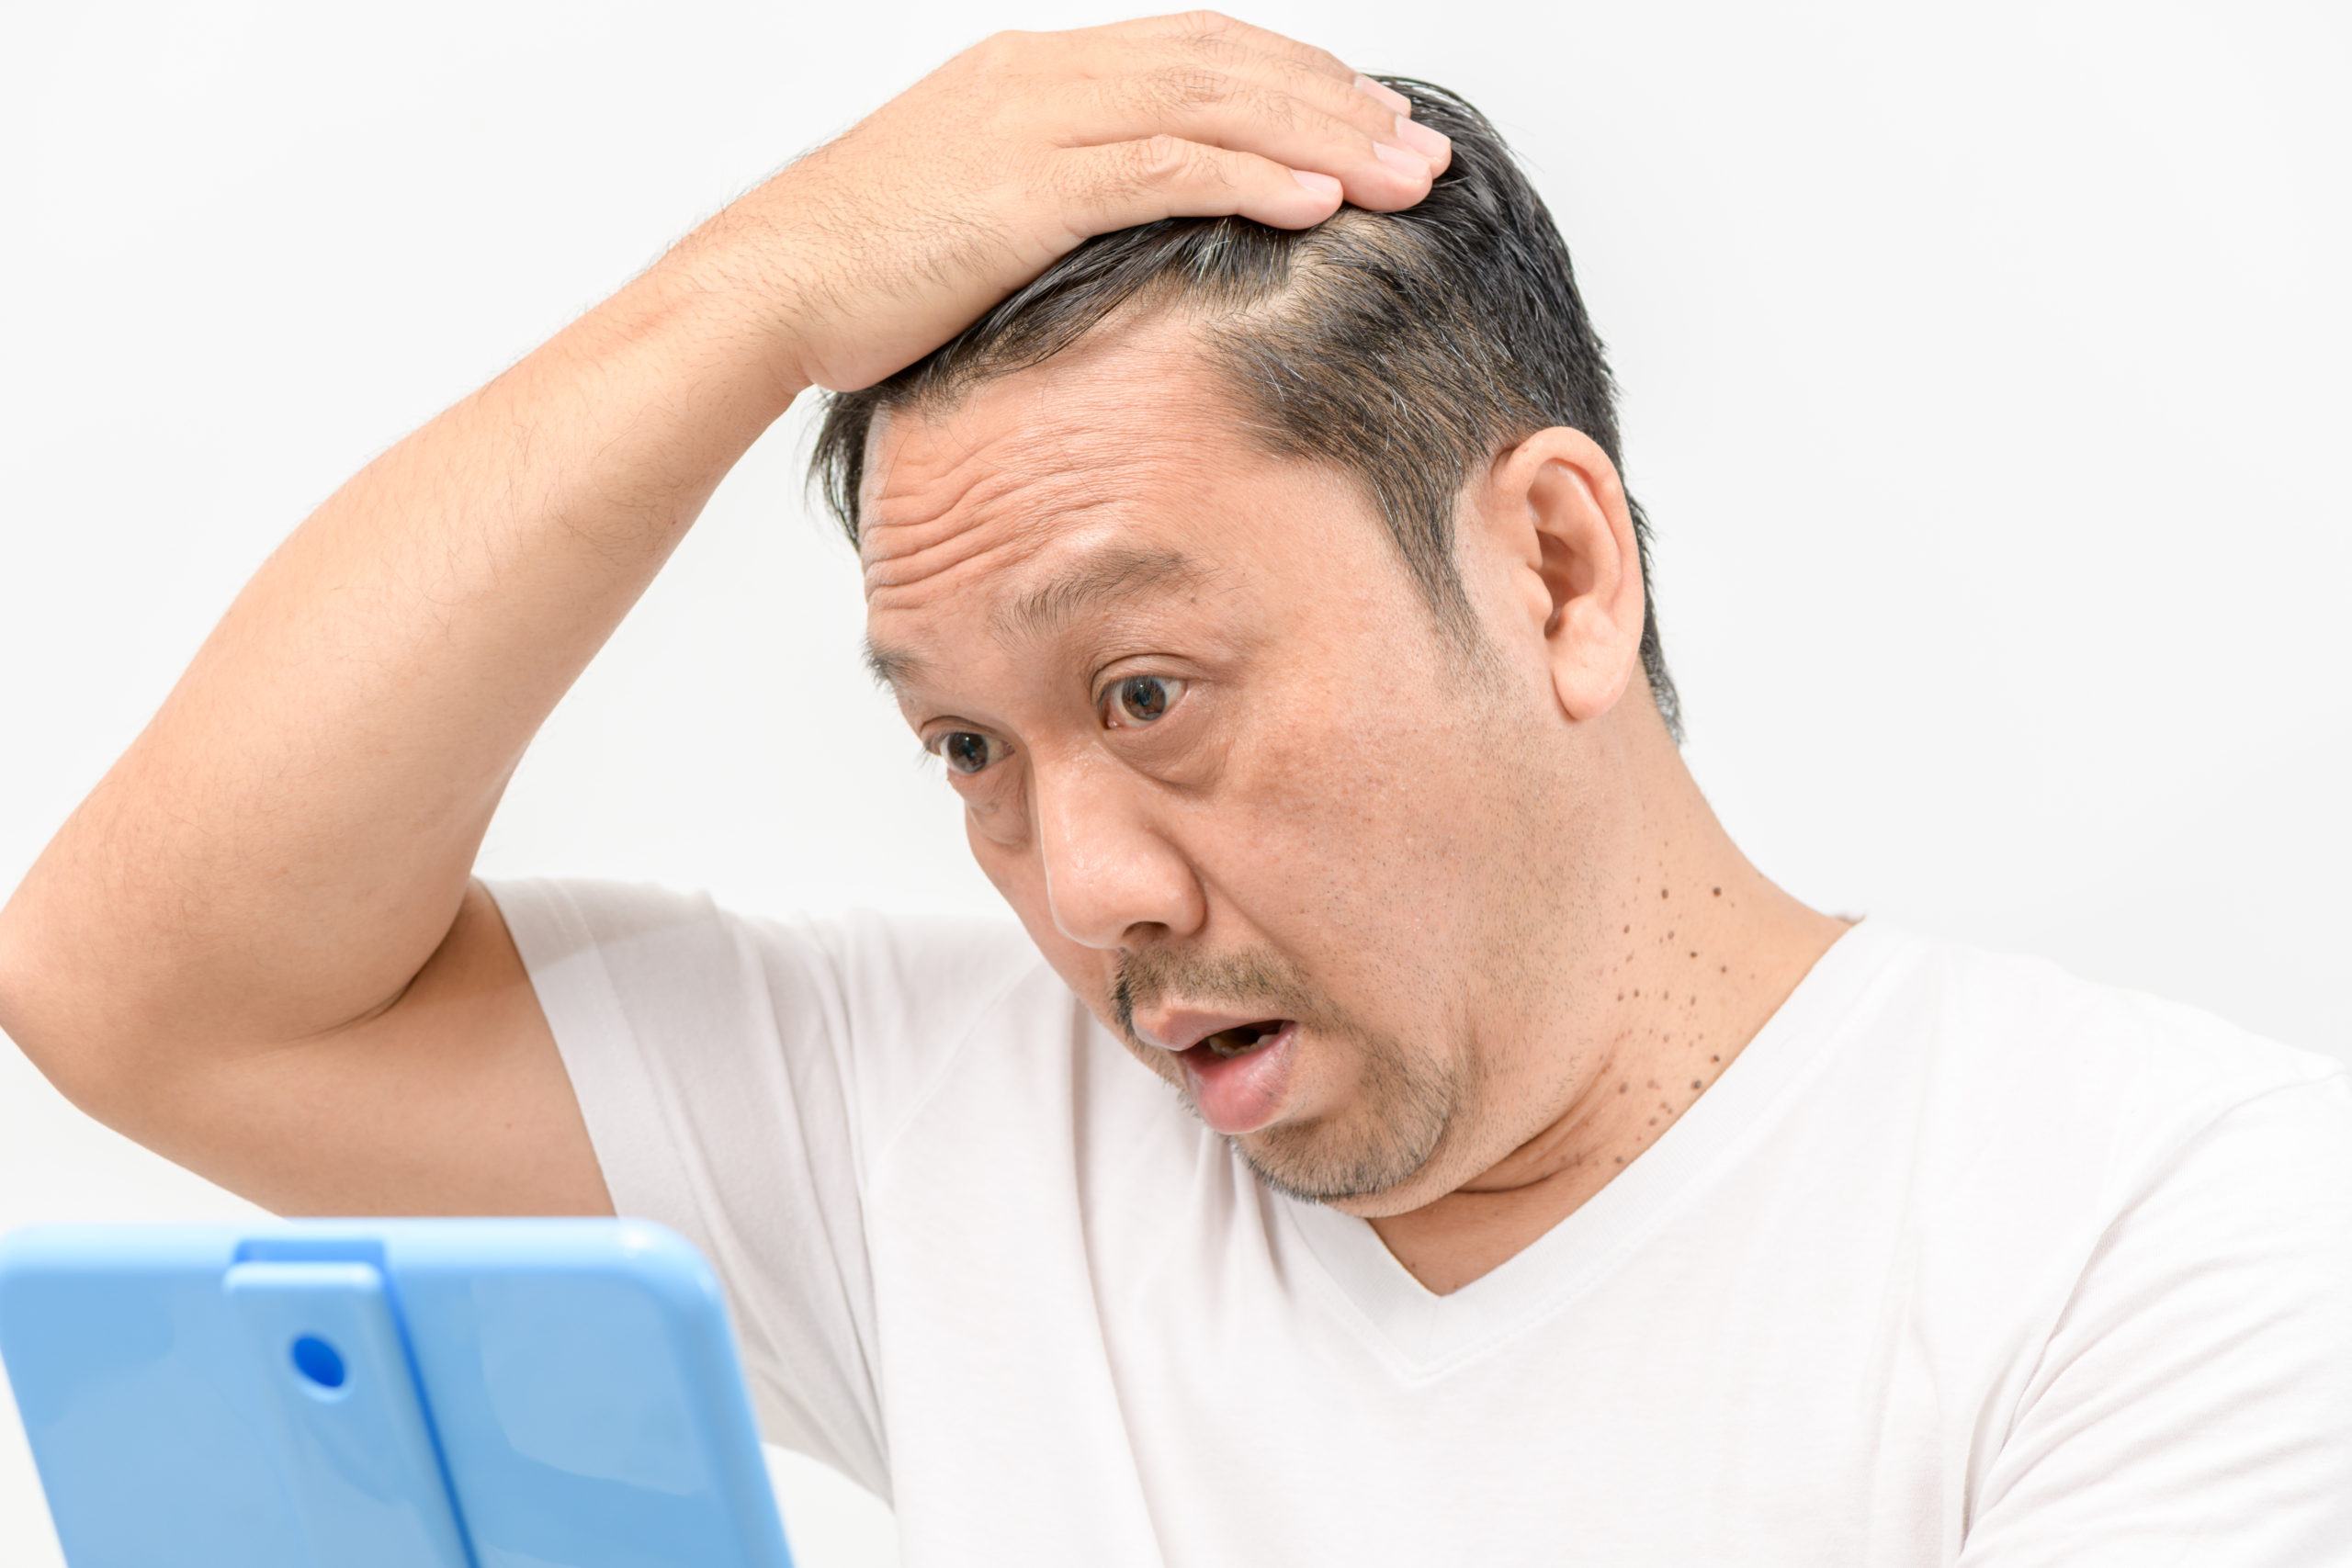 Middle-aged men worry about hair loss or hair growth.